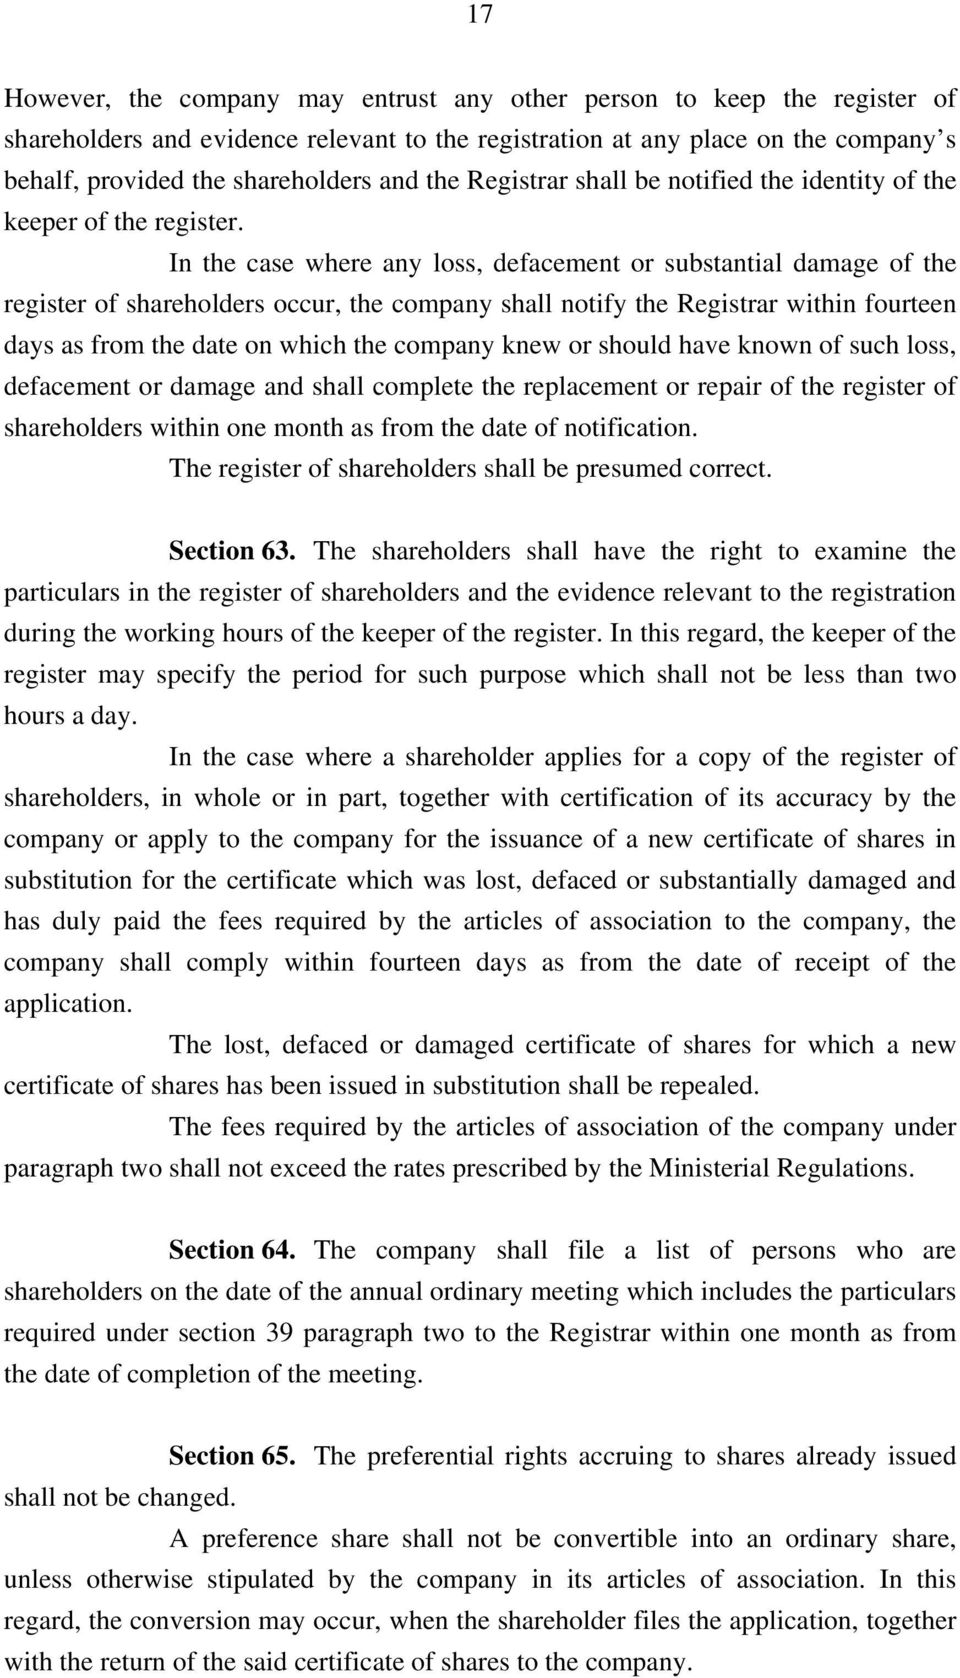 In the case where any loss, defacement or substantial damage of the register of shareholders occur, the company shall notify the Registrar within fourteen days as from the date on which the company